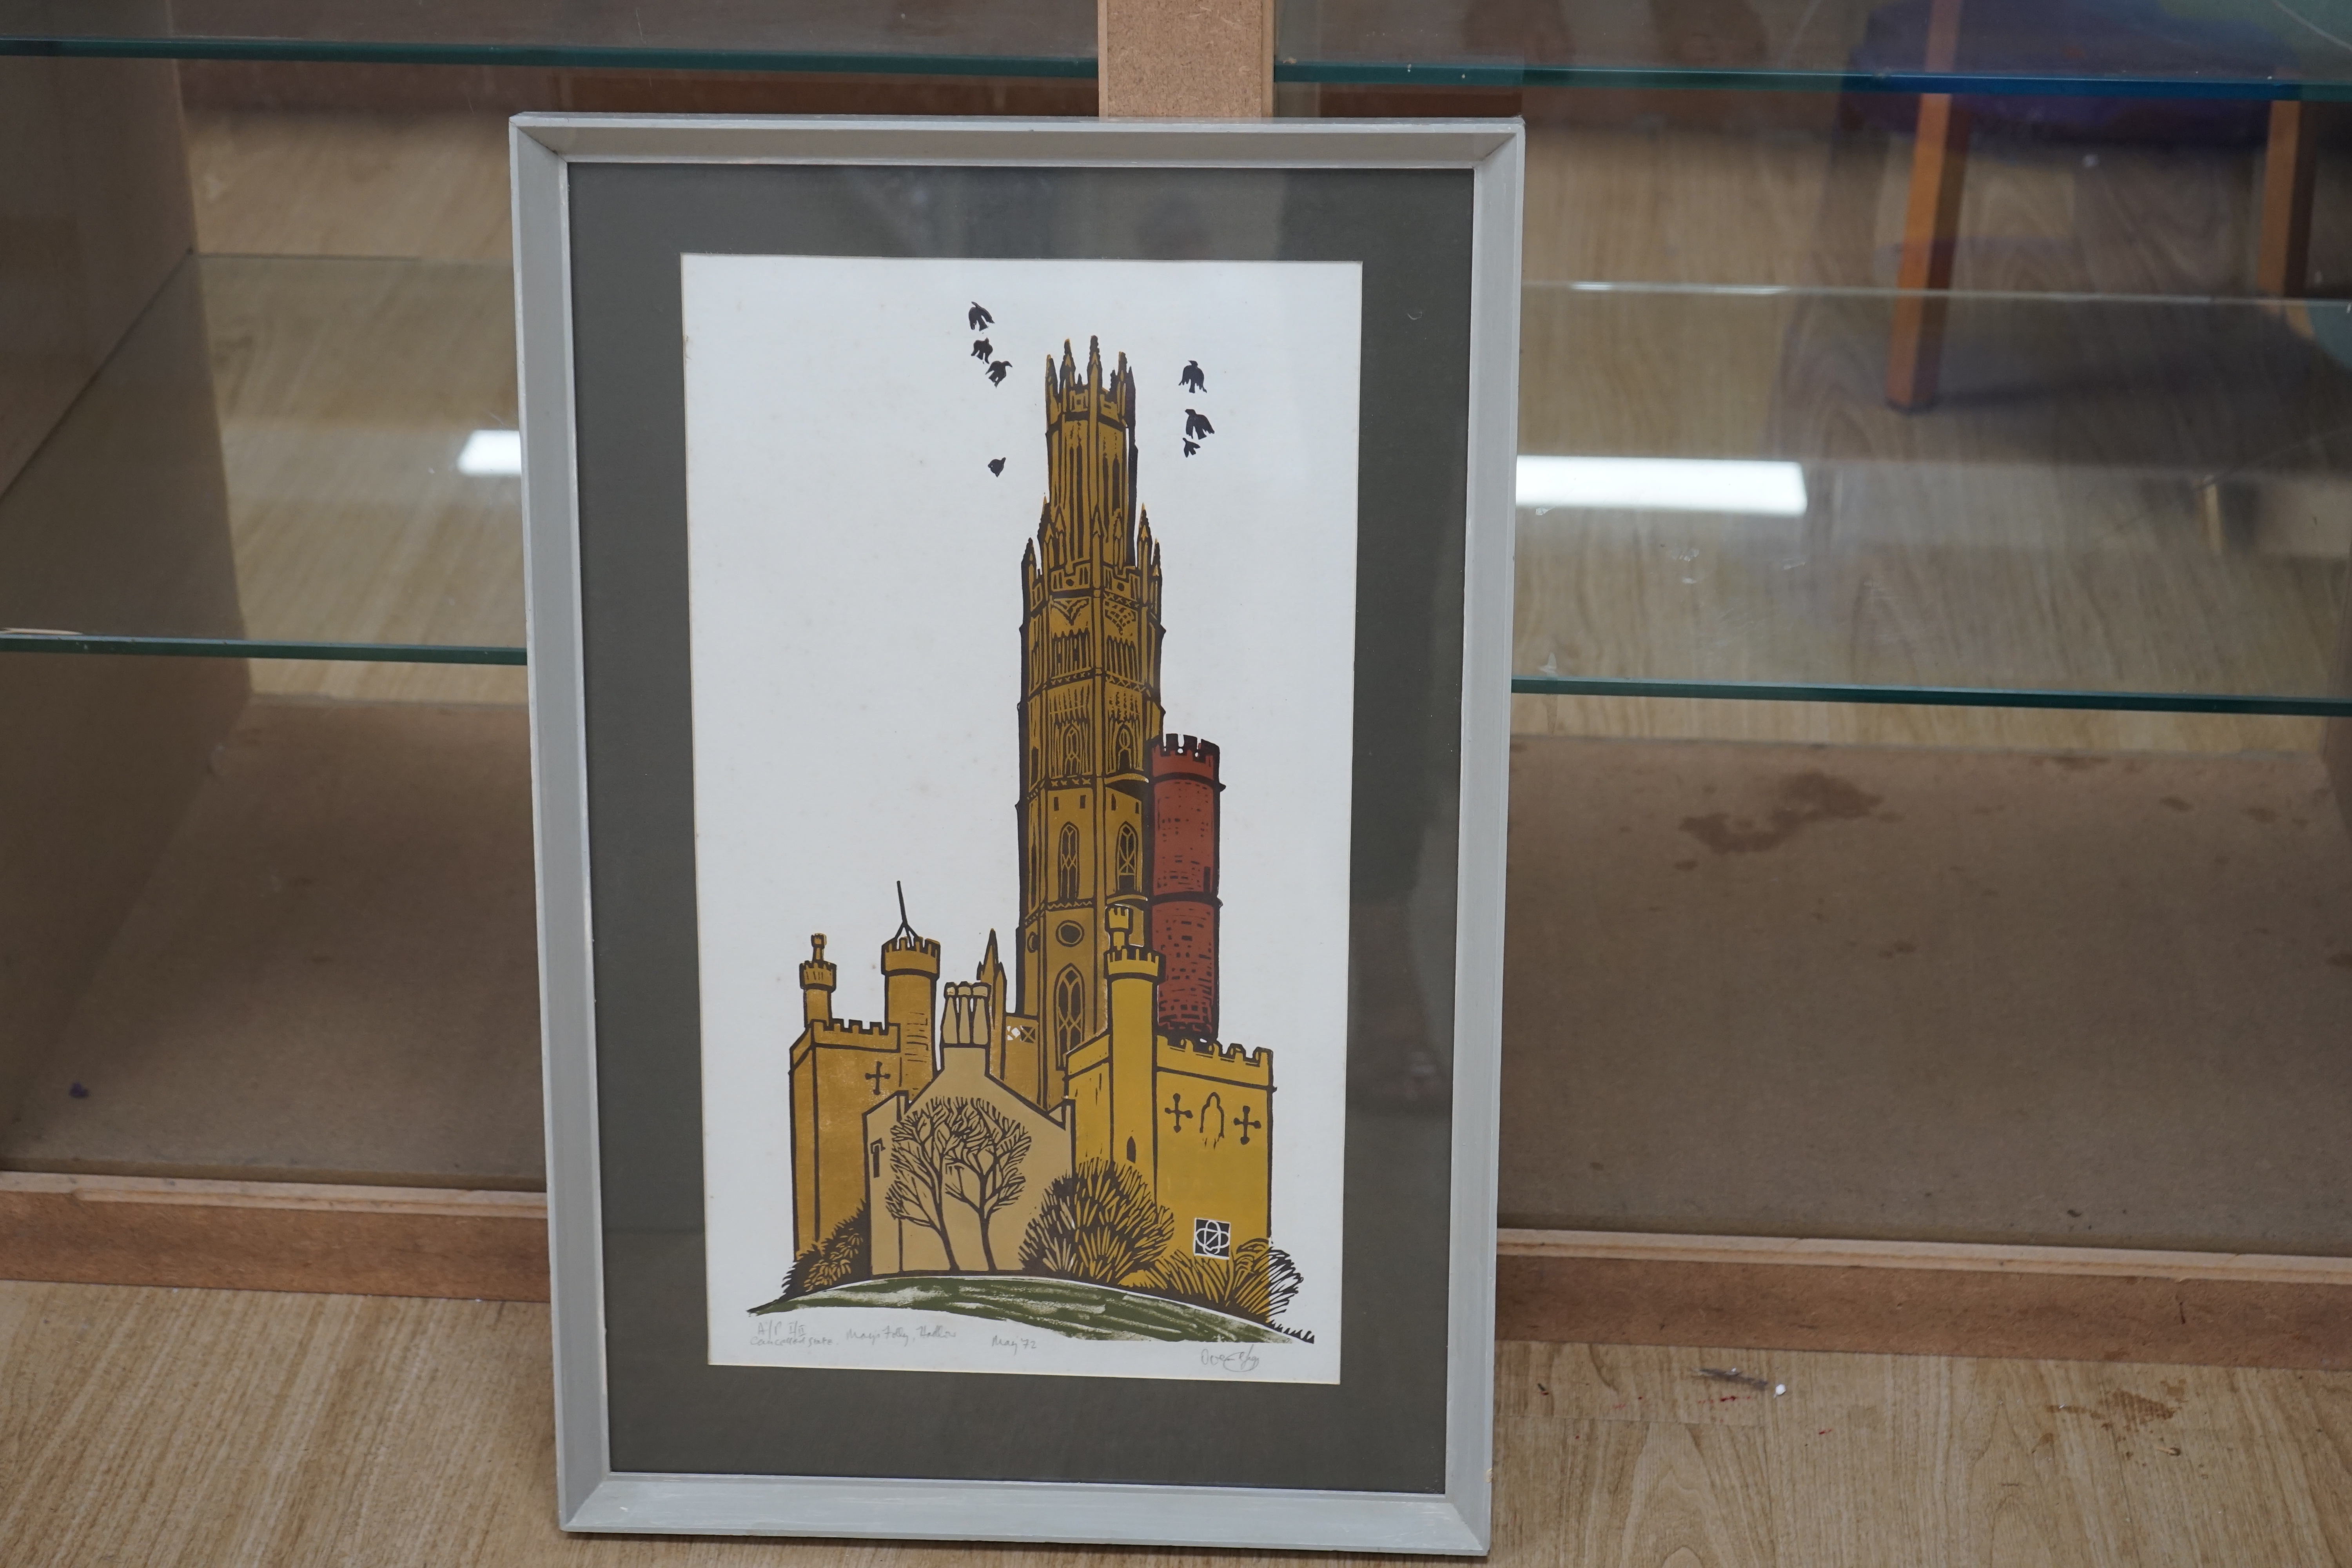 Artist's proof colour lino-cut, ‘Mays Folly, Hadlow’, edition I/II cancelled state, May '72, indistinctly signed Owen?, 56 x 31cm. Condition - good